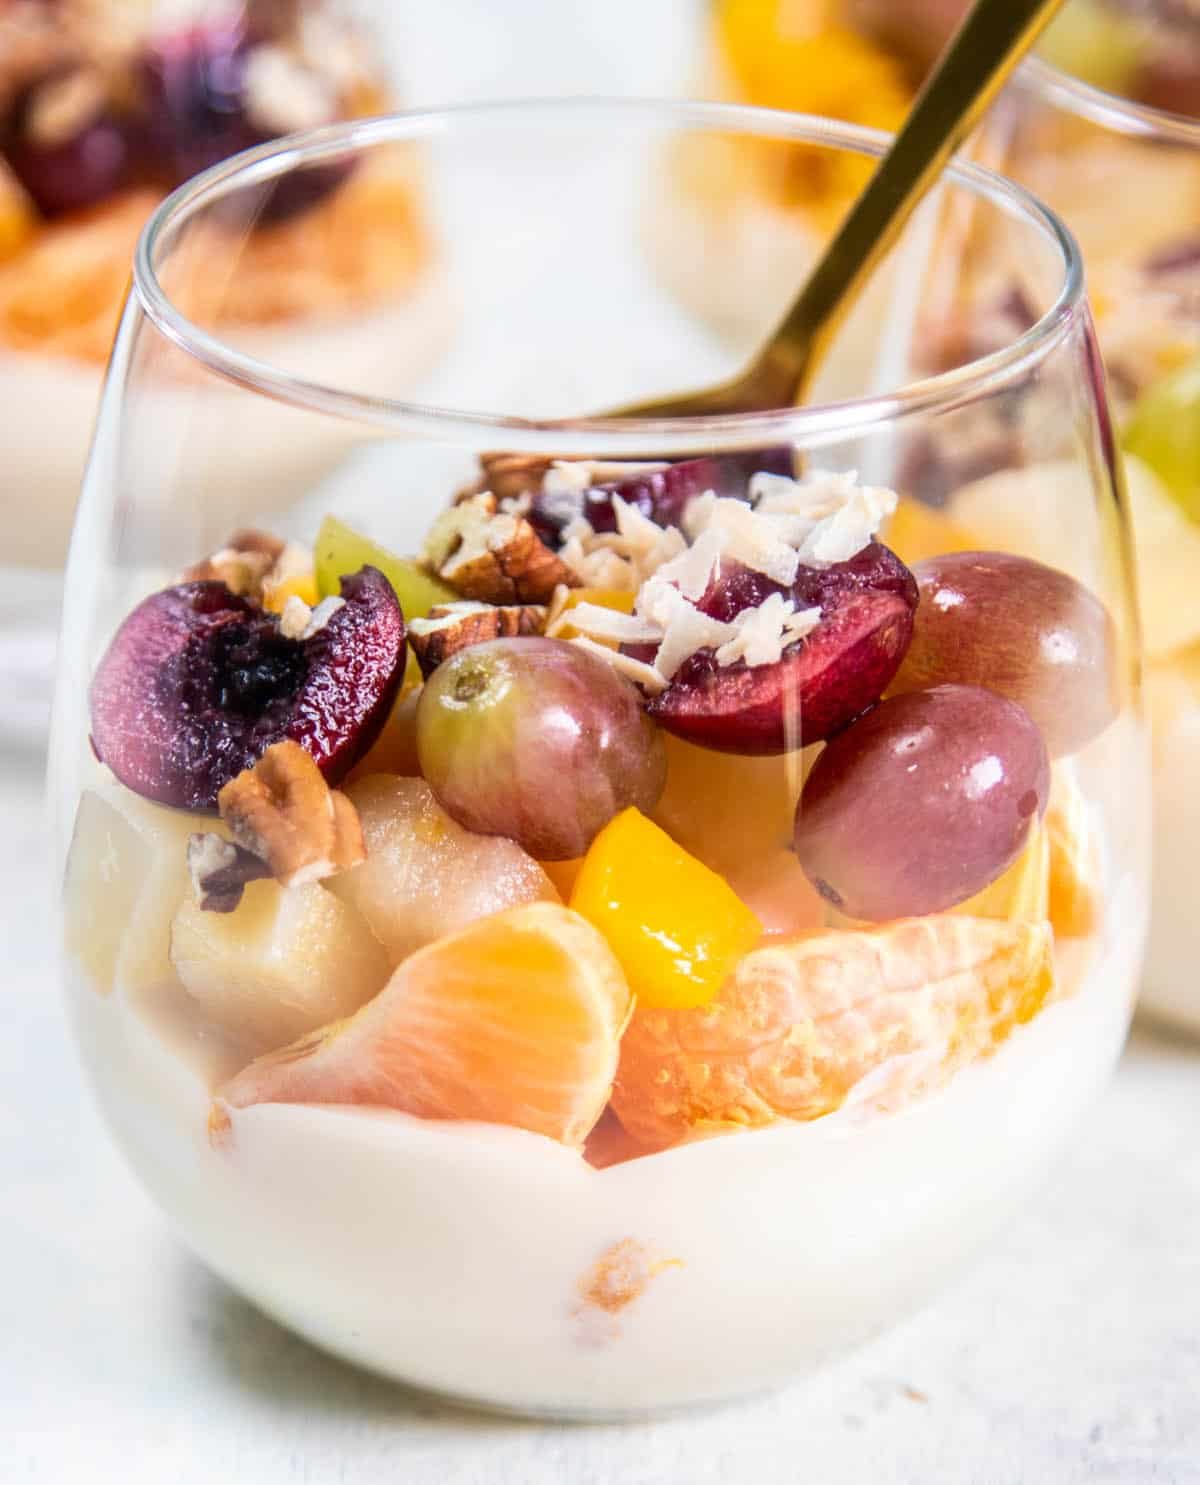 What to serve with baked eggs: A close up of layered Ambrosia Salad with mandarins, grapes, cherries, pears, and peaches.